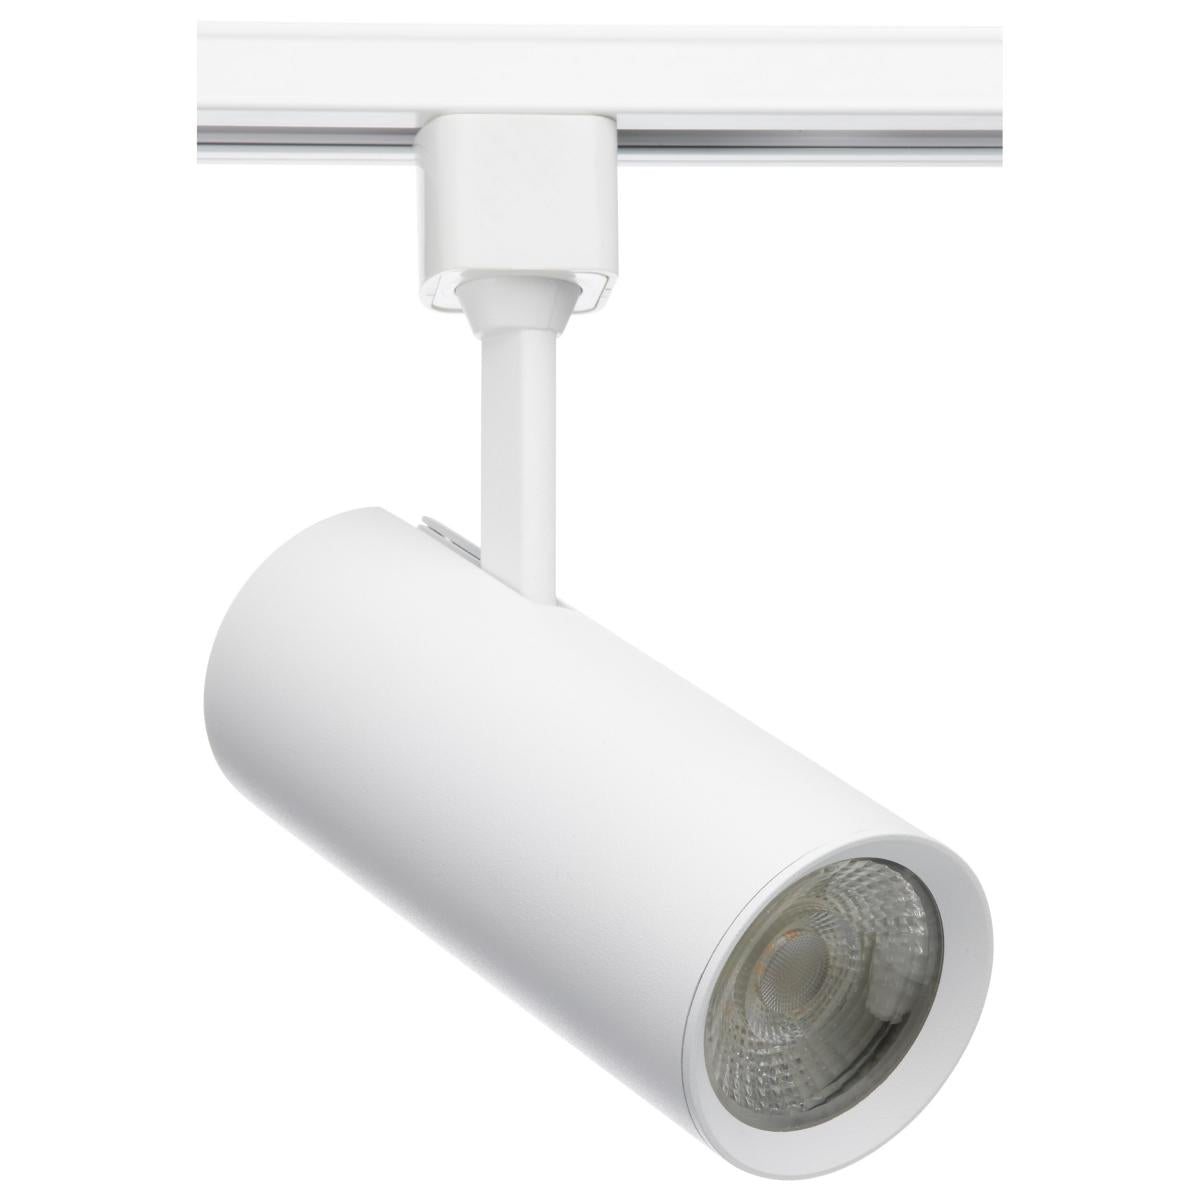 Satco TH613 20 Watt; LED Commercial Track Head; White; Cylinder; 36 Degree Beam Angle